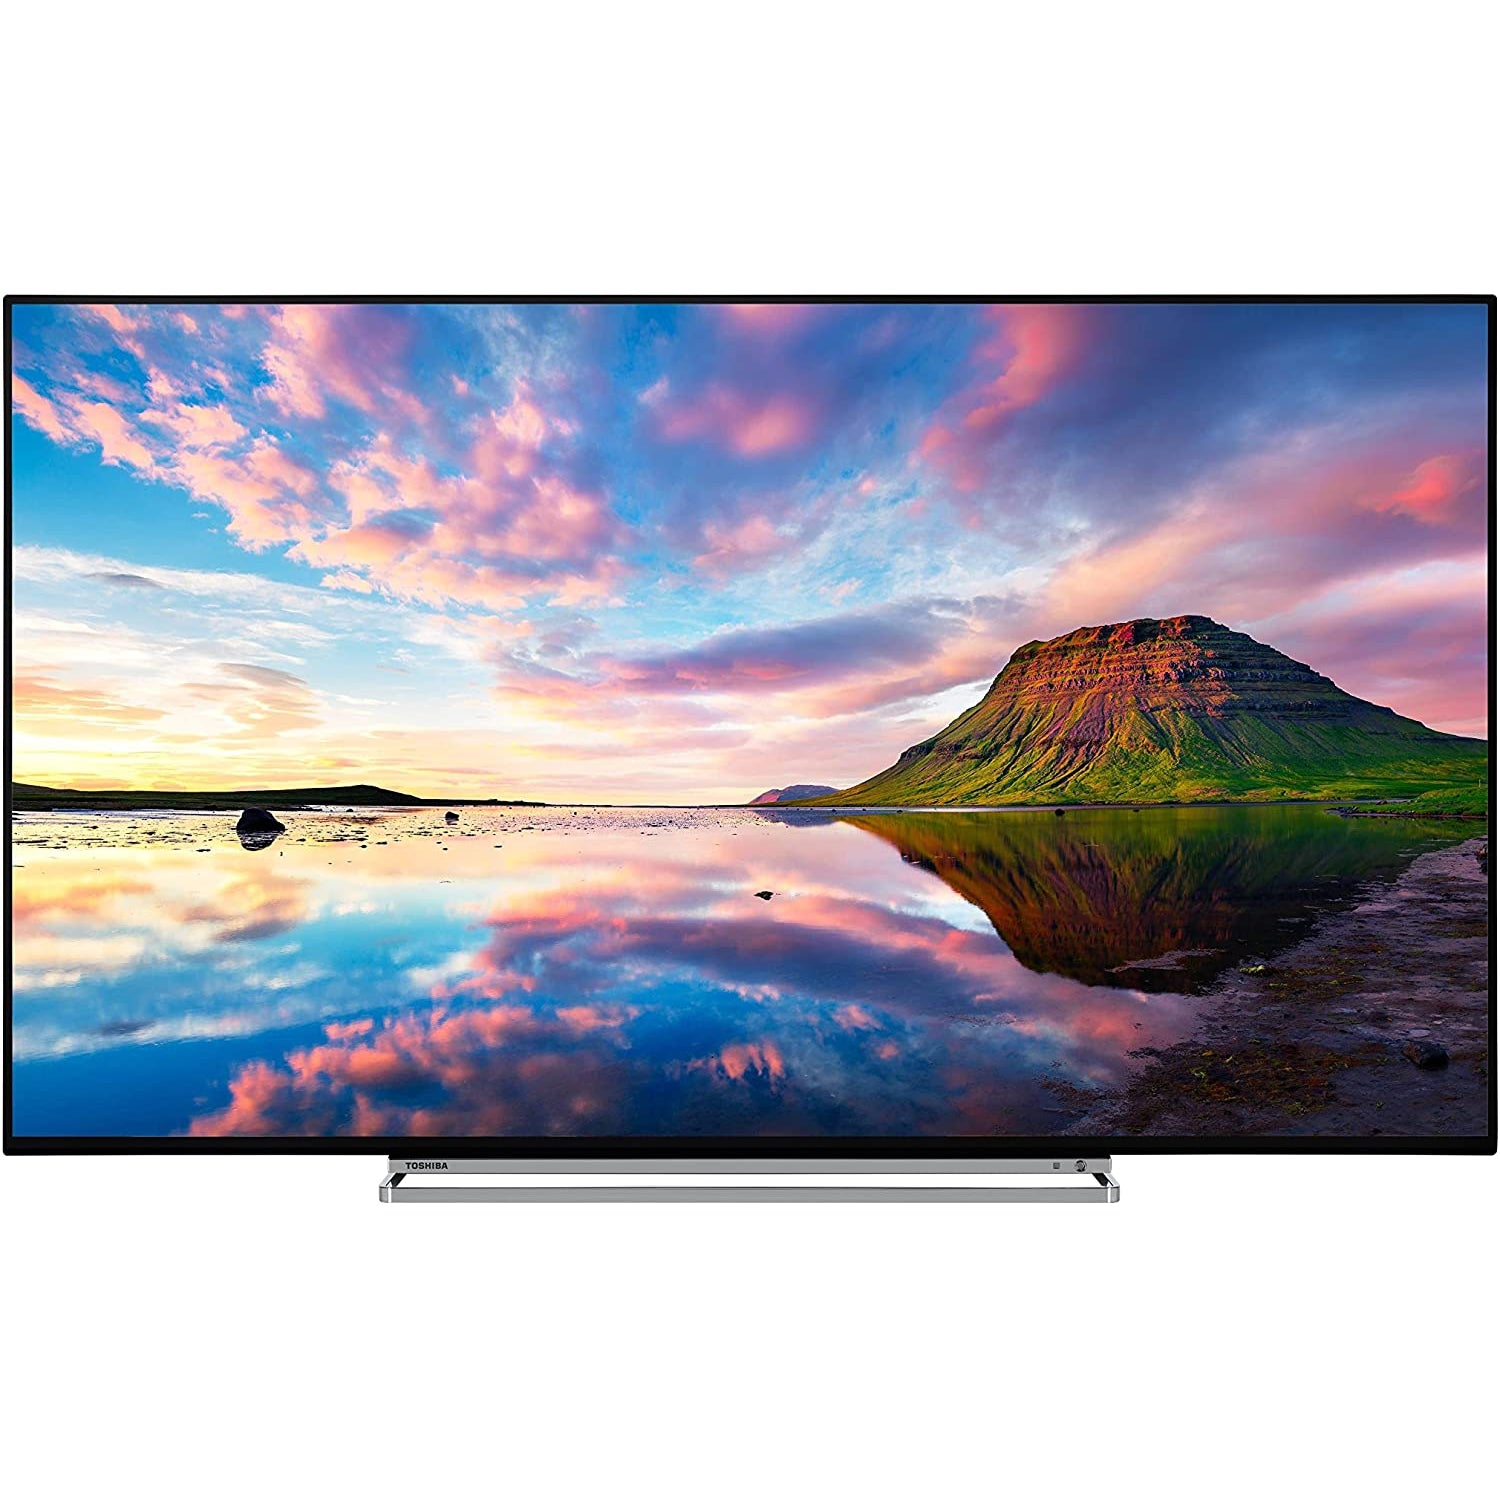 Toshiba 55U5863DB 55-Inch Smart 4K Ultra-HD HDR LED WiFi TV with Freeview Play- Black/Silver